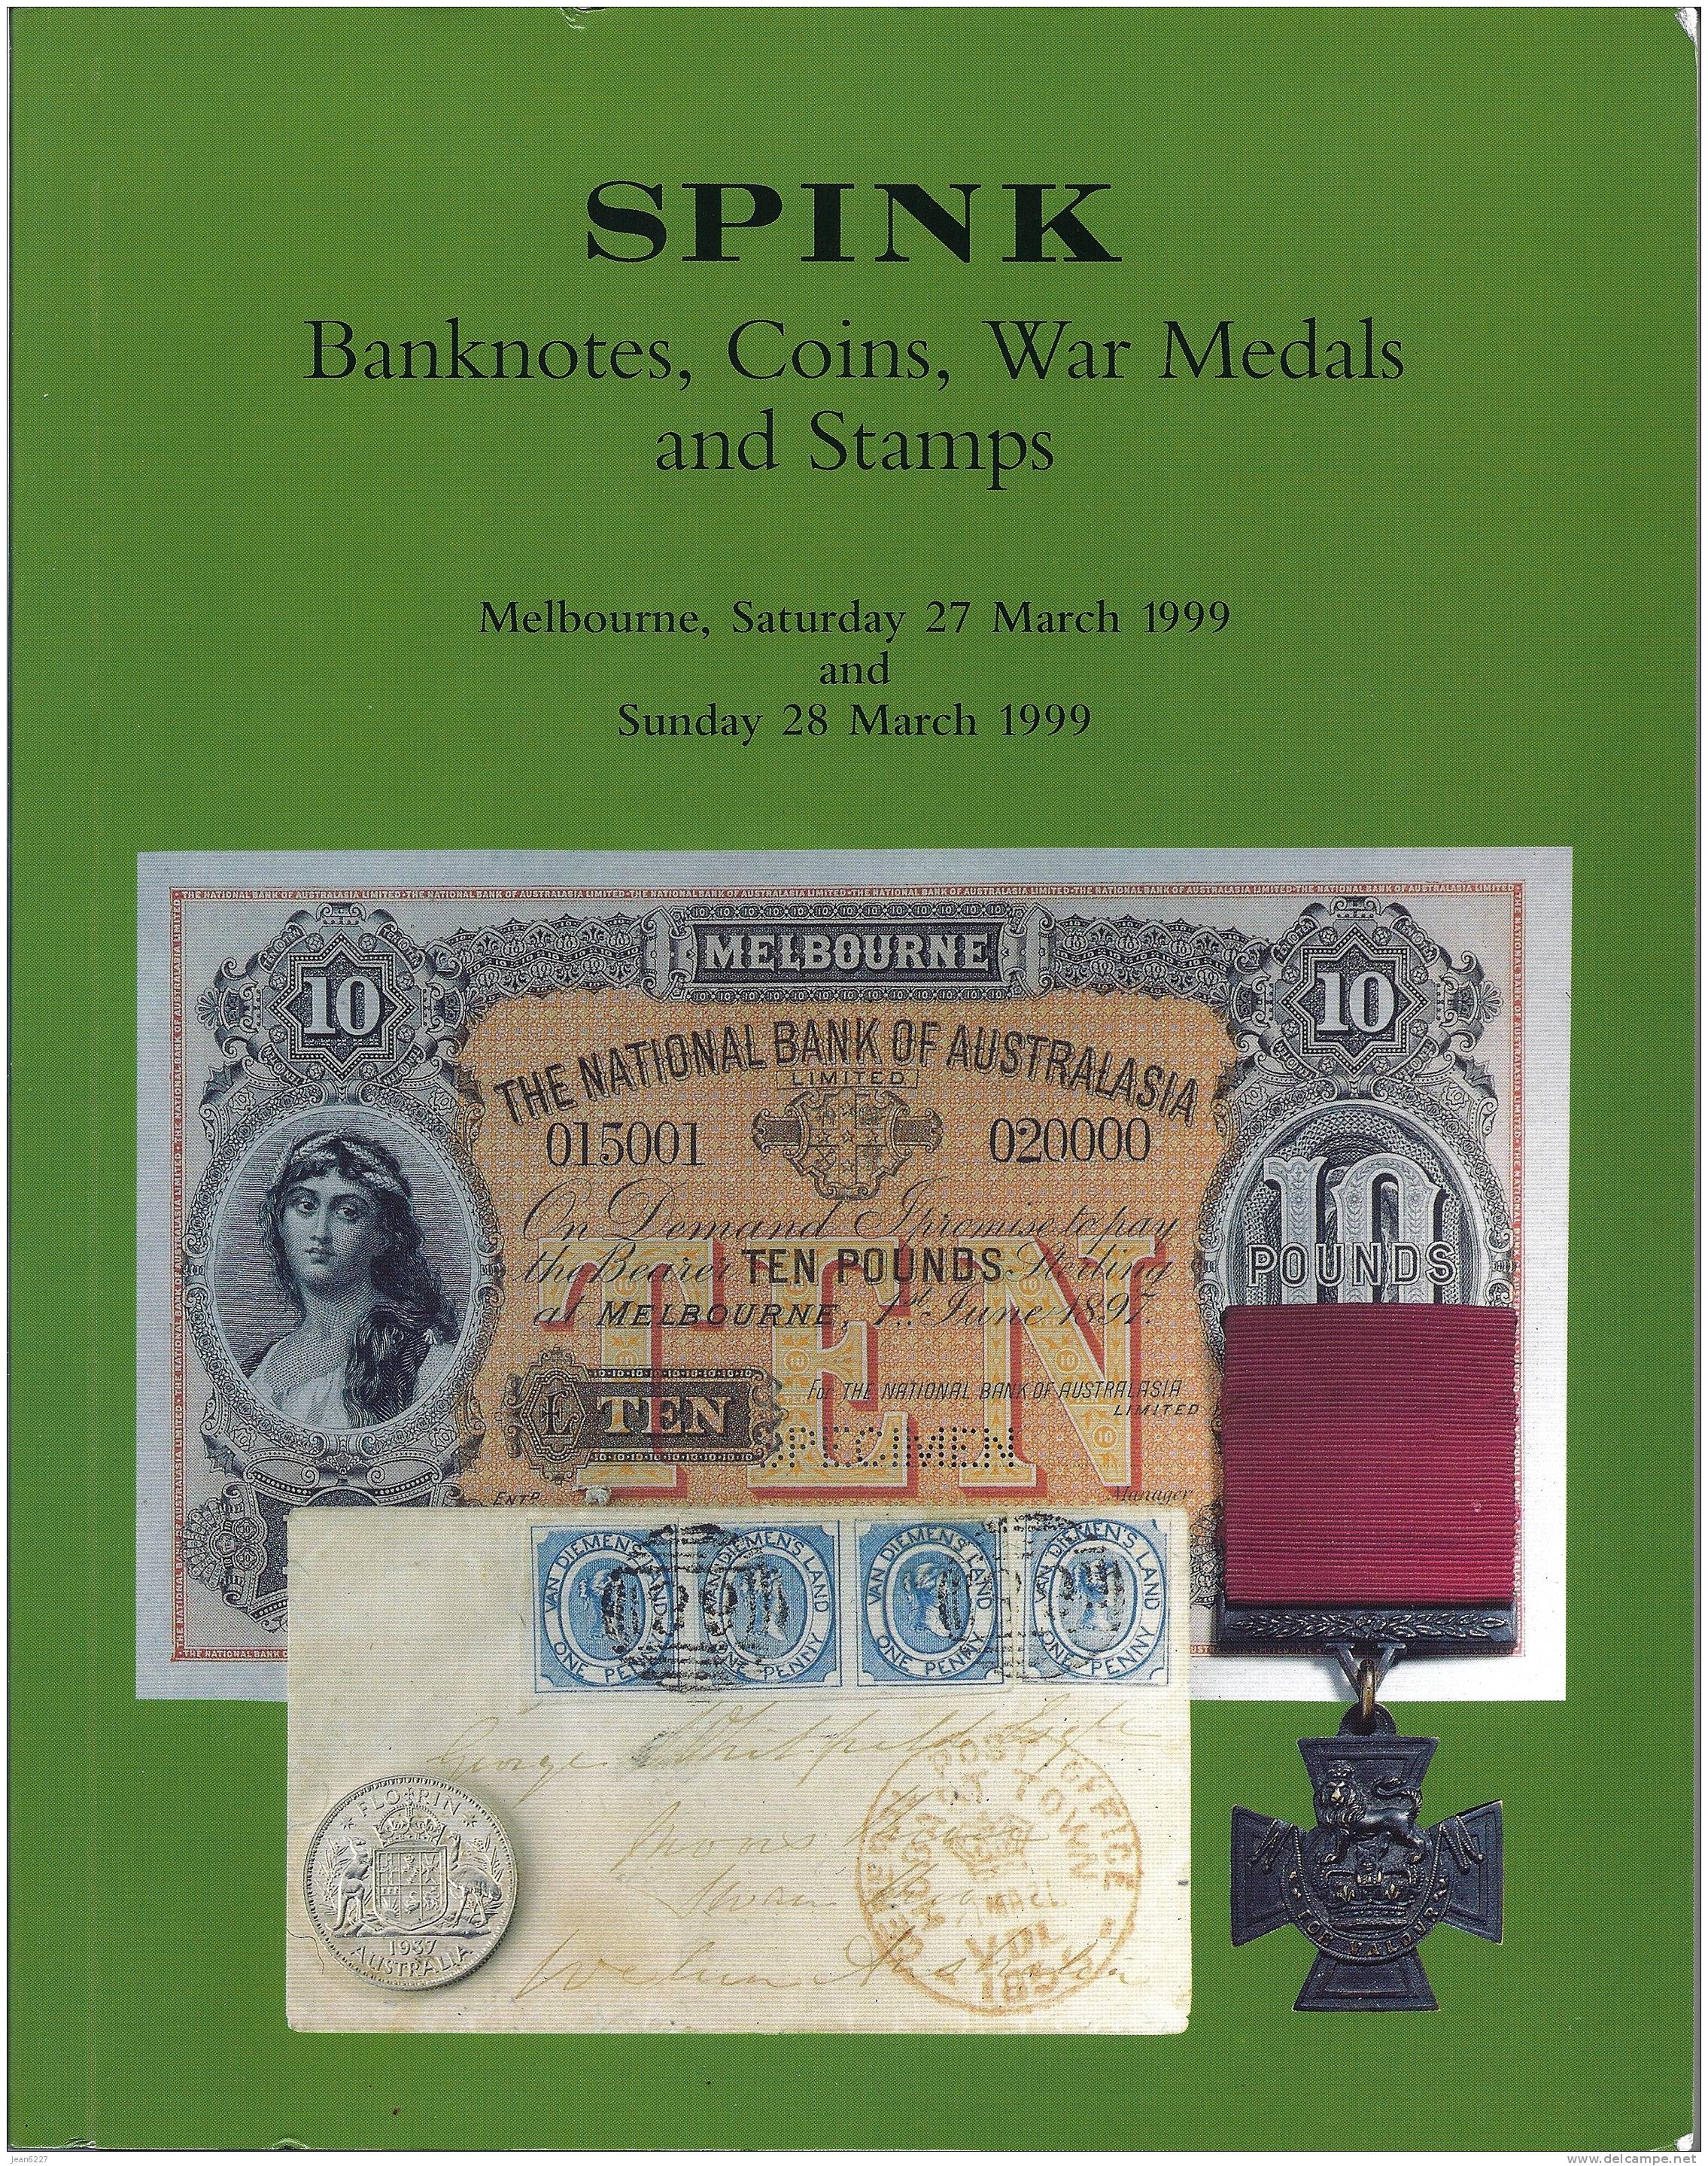 Spink Auctions - Australia - Catalogues For Auction Houses